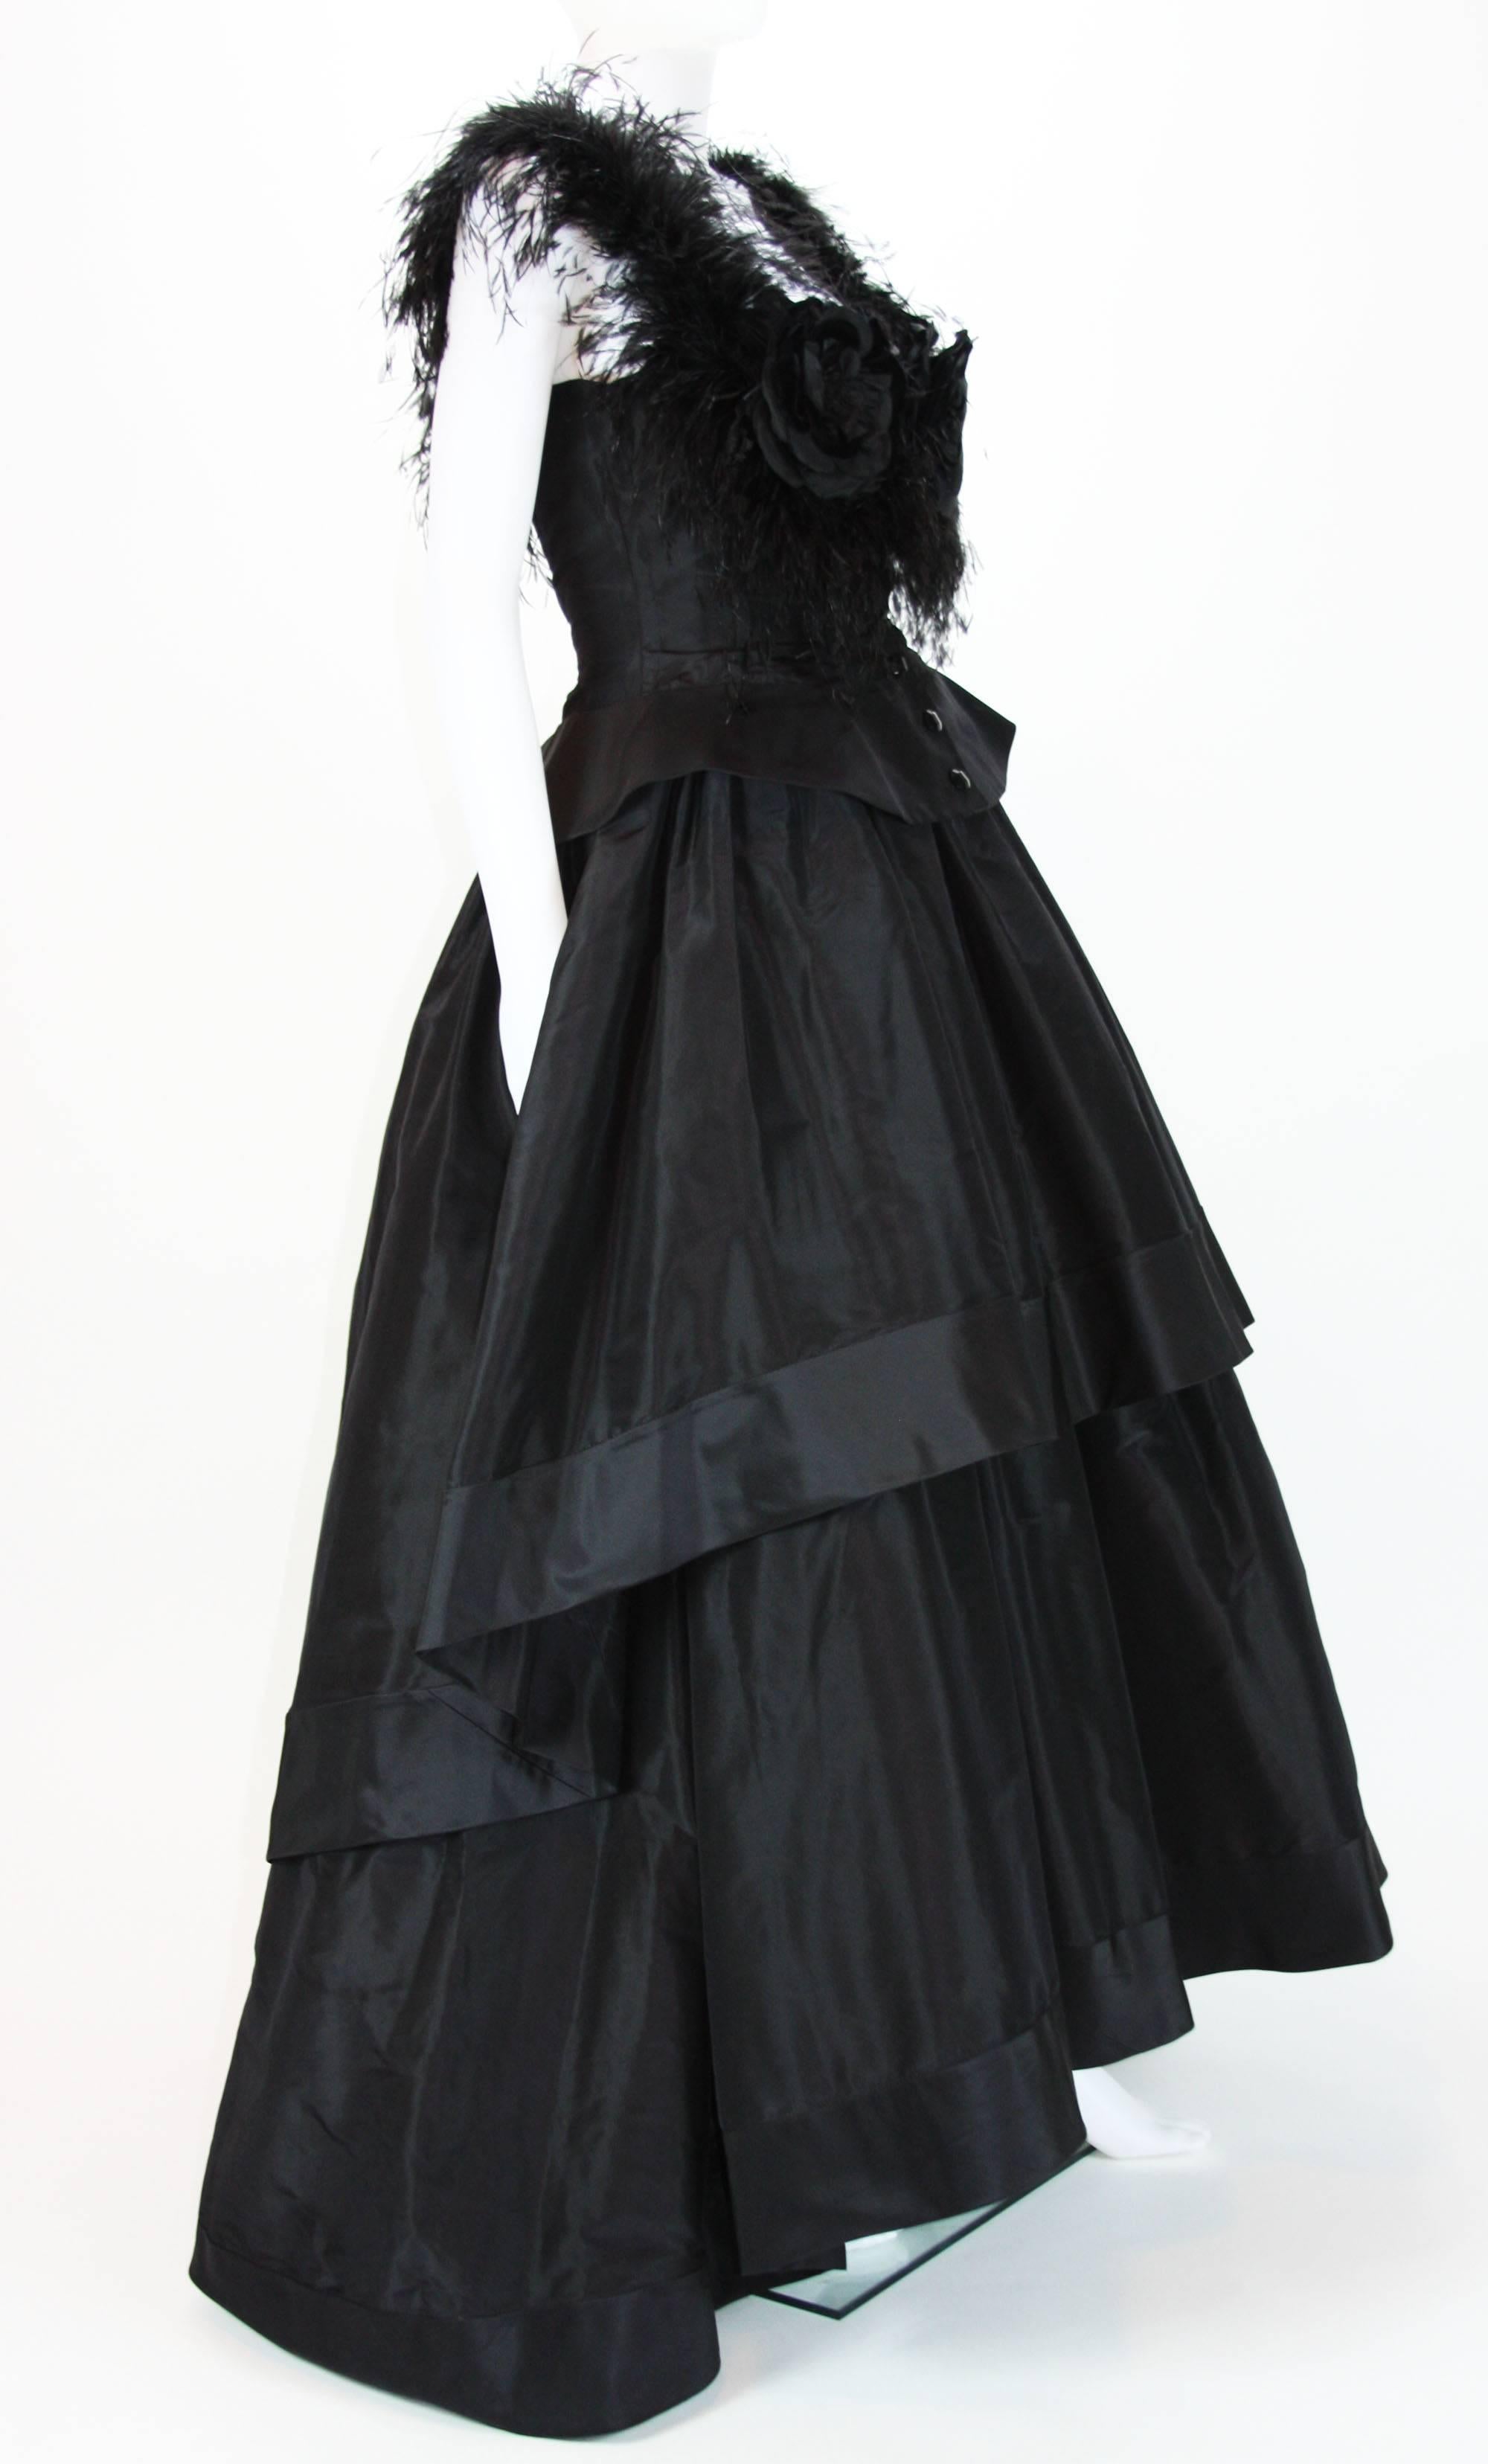 Valentino Boutique Black Ball Gown
No label size (waist 30", bust 36")
Feathers, Taffeta silk.
Brand New Condition.